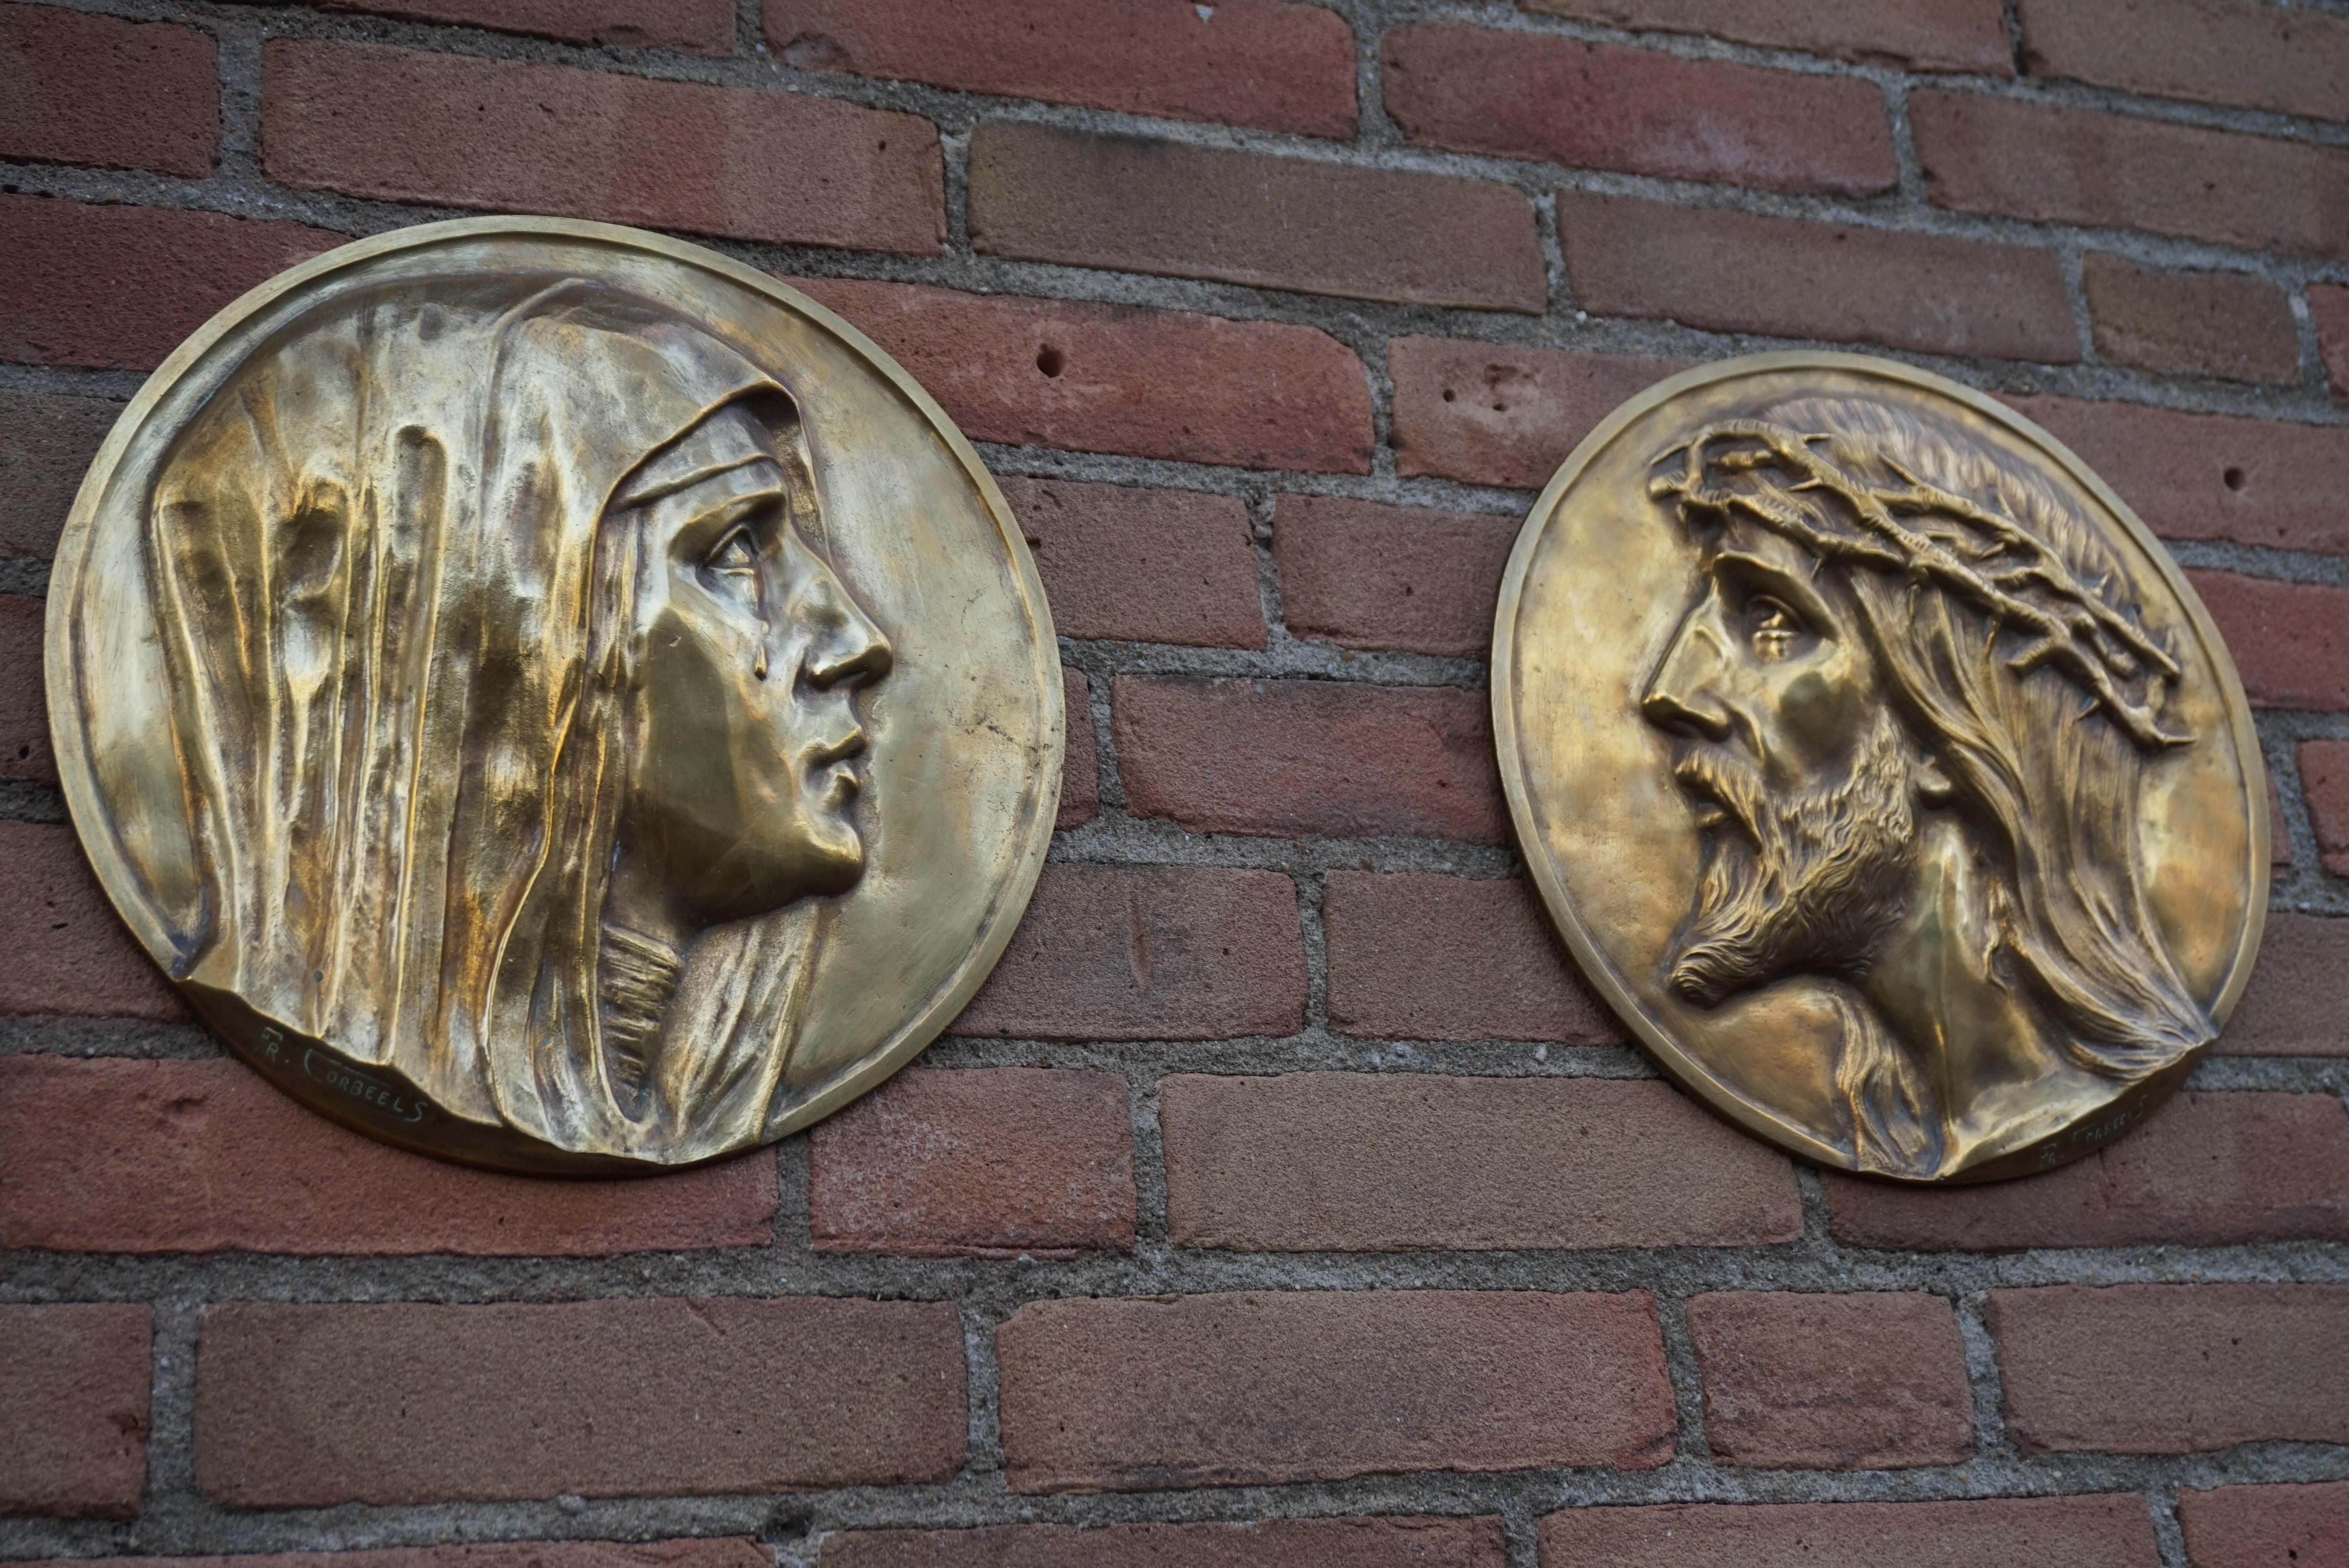 Rare pair of early 1900s bronze plaques by Fr. Corbeels (1888-1956).

This sizable pair of bronze wall plaques is another one of our recent, great finds. Finding works of art by this skilled Belgian sculptor is a real challenge and at this moment we